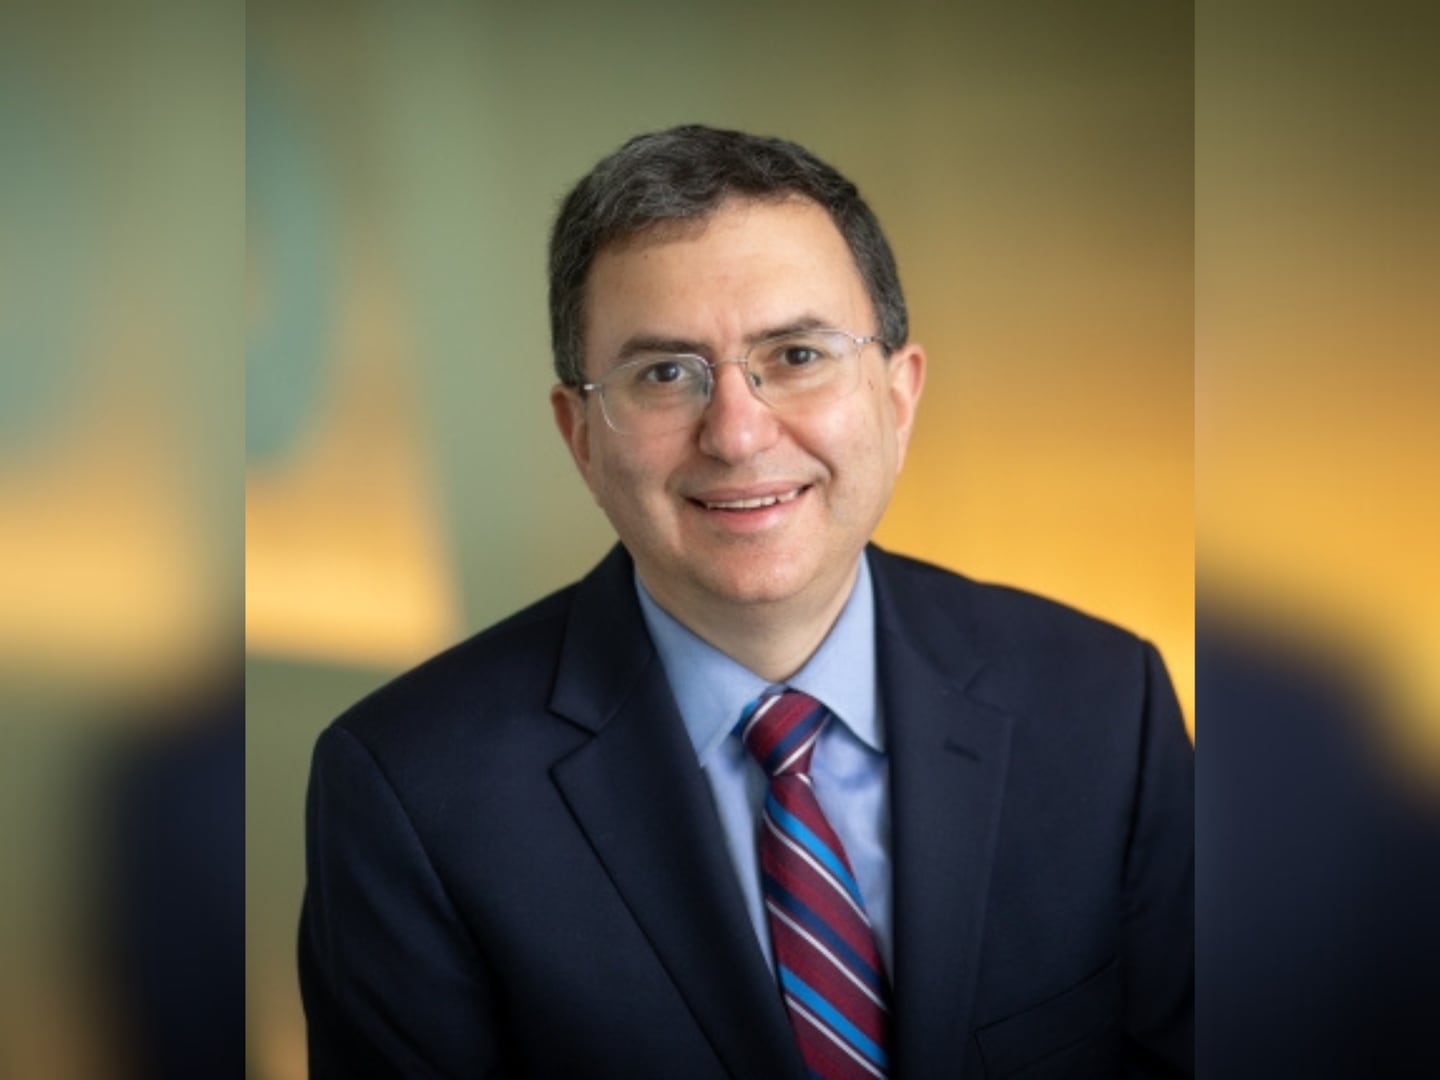 Former Maryland Health Secretary Joshua M. Sharfstein has been named chair of the Maryland Health Services Cost Review Commission by Gov. Wes Moore.